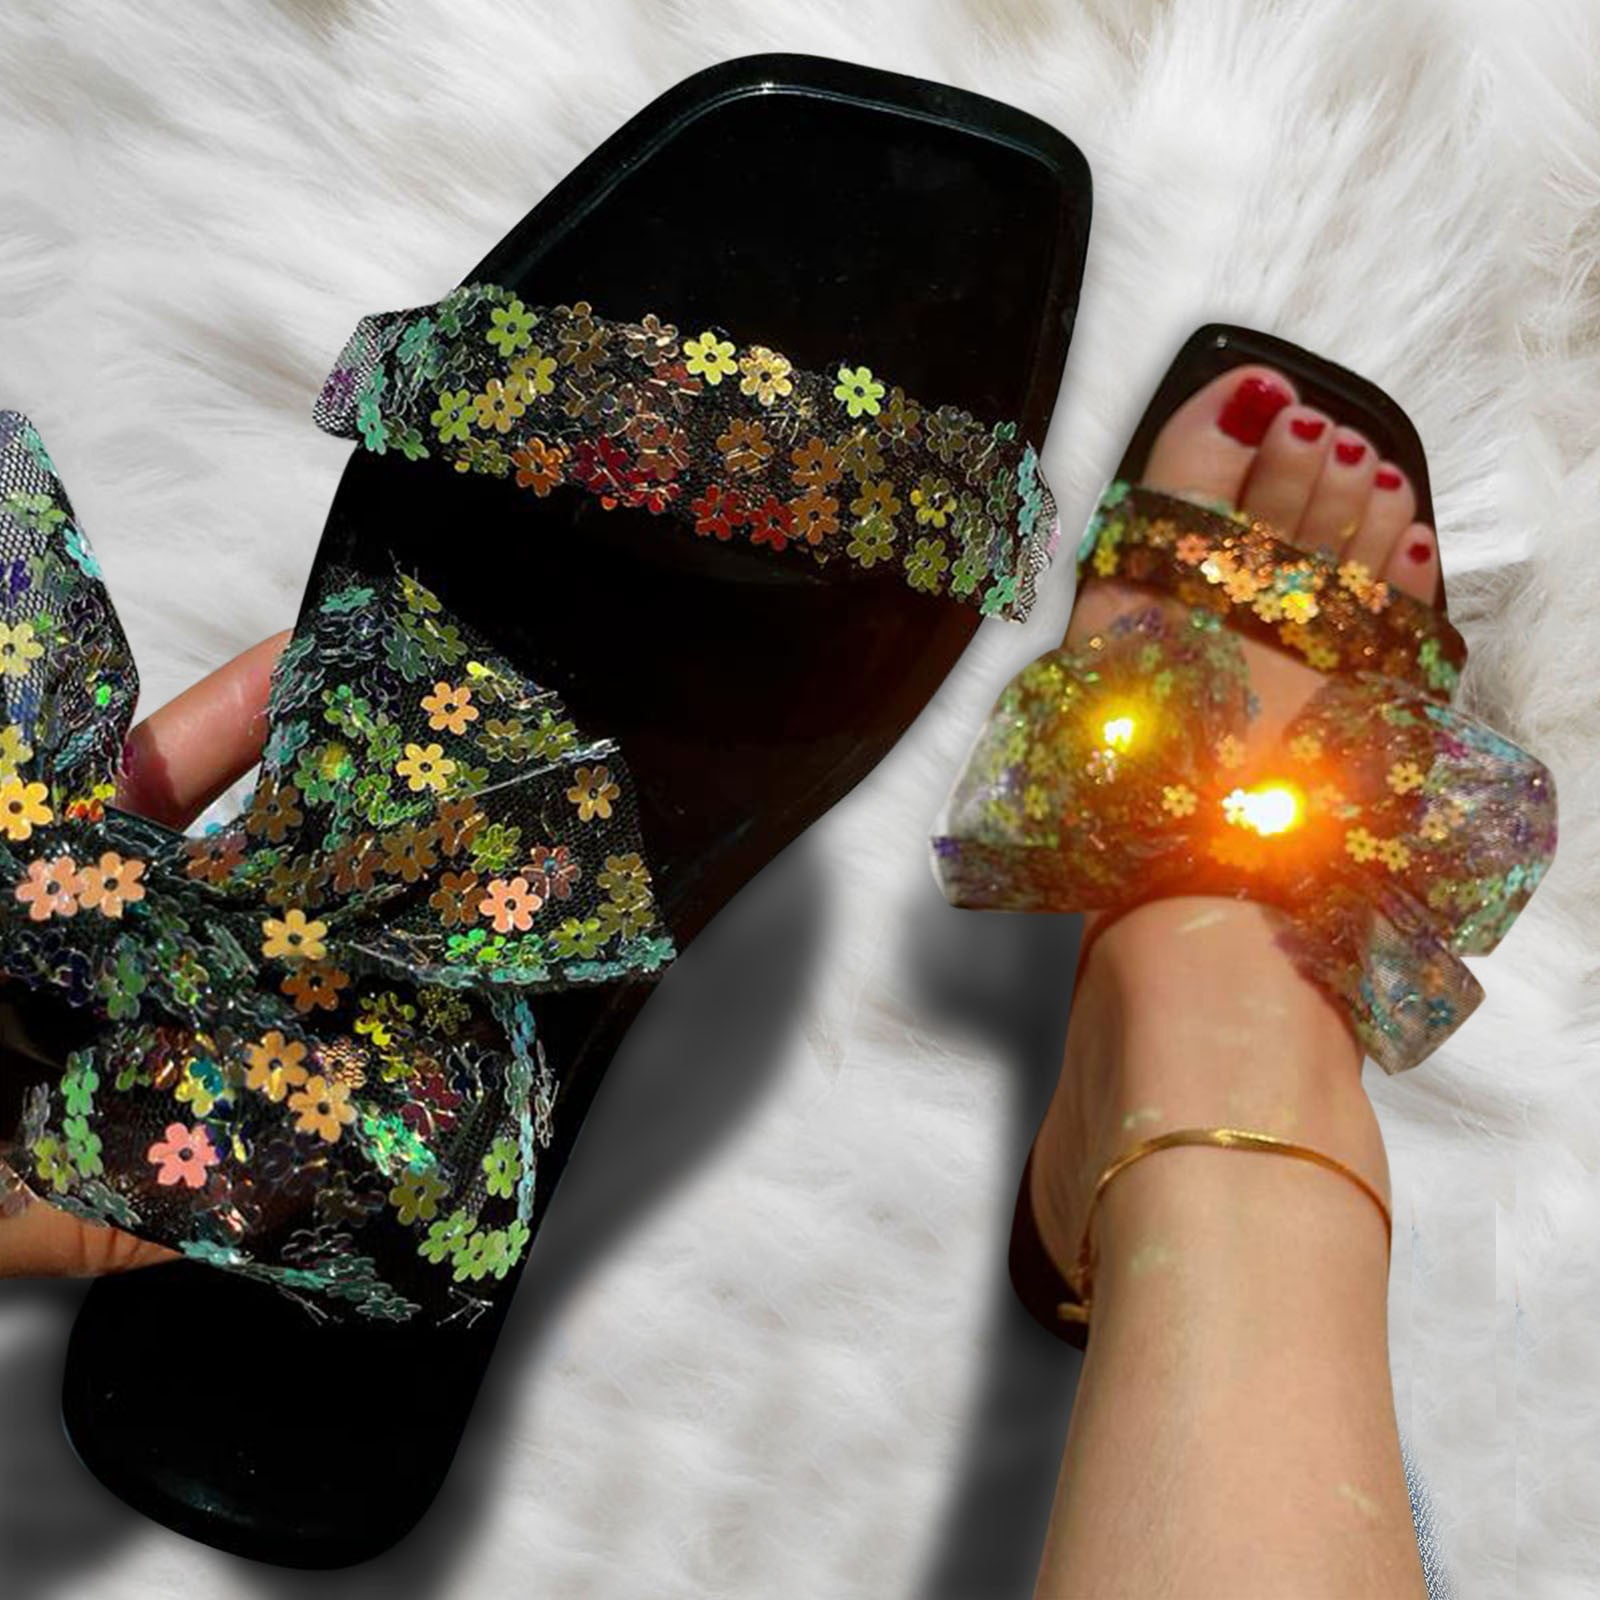 Womens Shoes Summer Square Toe Slippers Fashion Lace Bow Flower Glitter Sequin Sandals Crazy Slippers for Animal Women Bedroom Slippers Size 12 Womens Slipper Boots Women Slipper Socks Character - Walmart.com